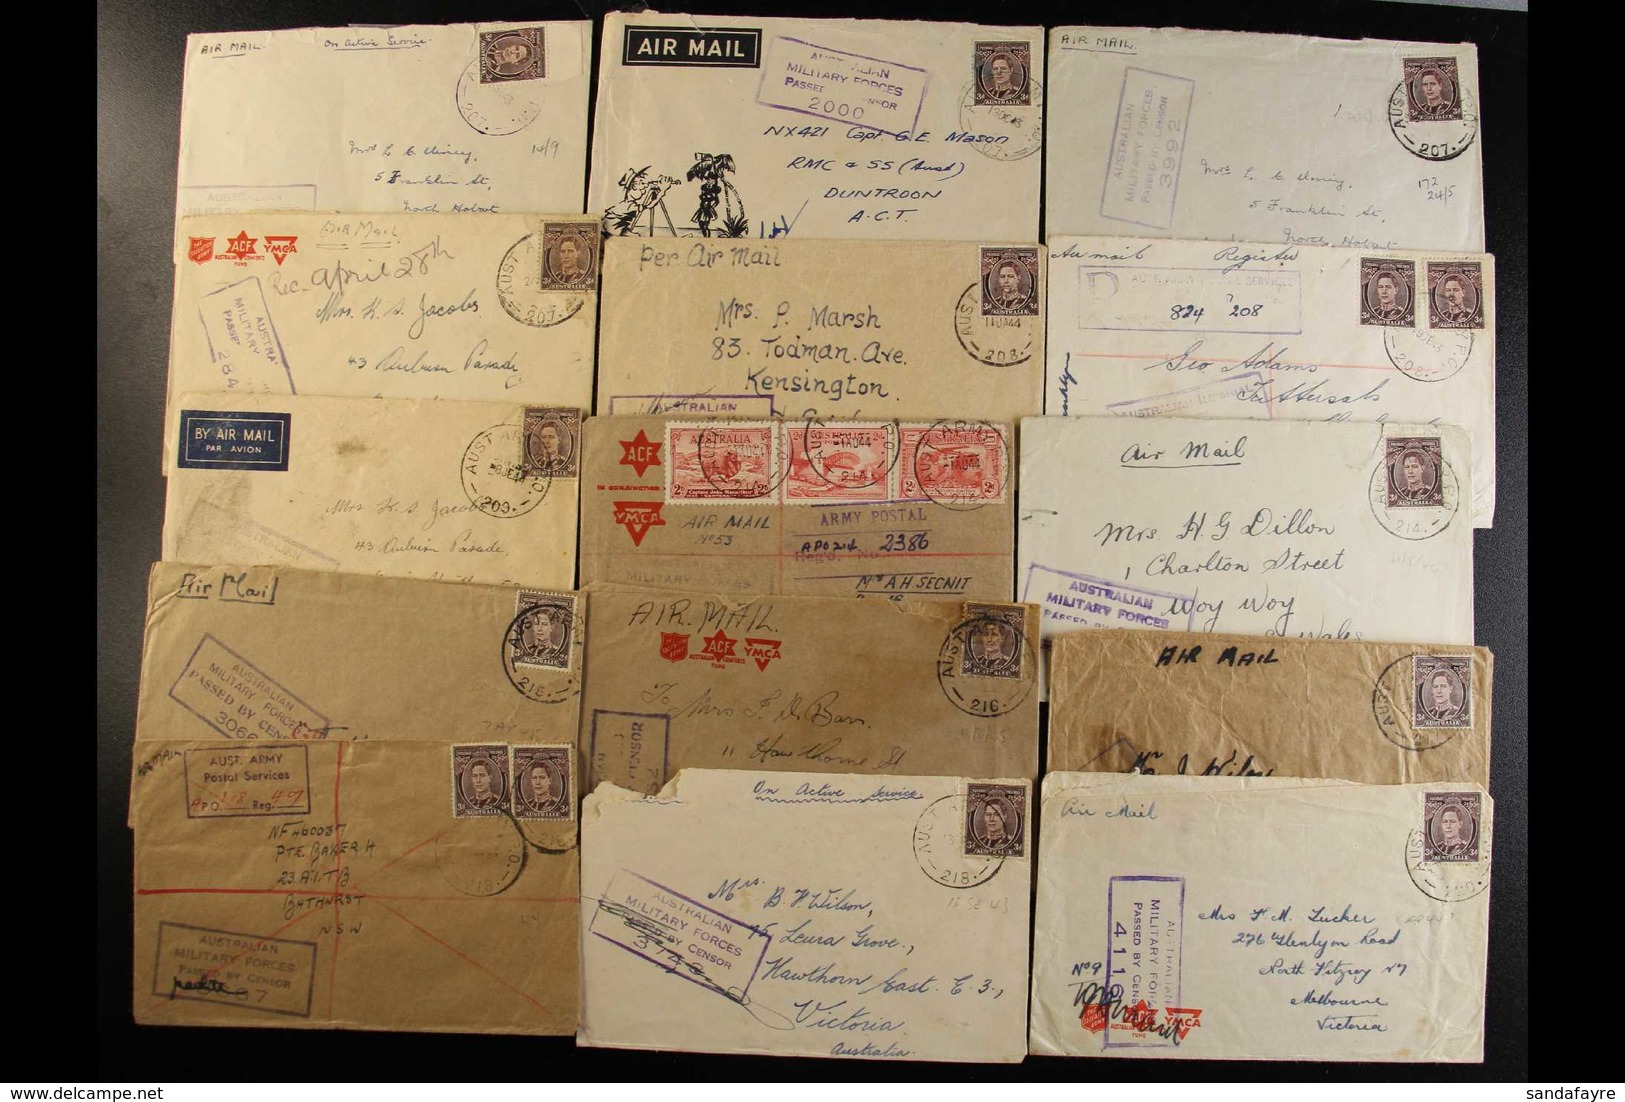 WW2 AUSTRALIAN FORCES - AUST ARMY DATESTAMPS  A Fine Collection Of Covers Back To Australia, Bearing Australian KGVI Sta - Papoea-Nieuw-Guinea